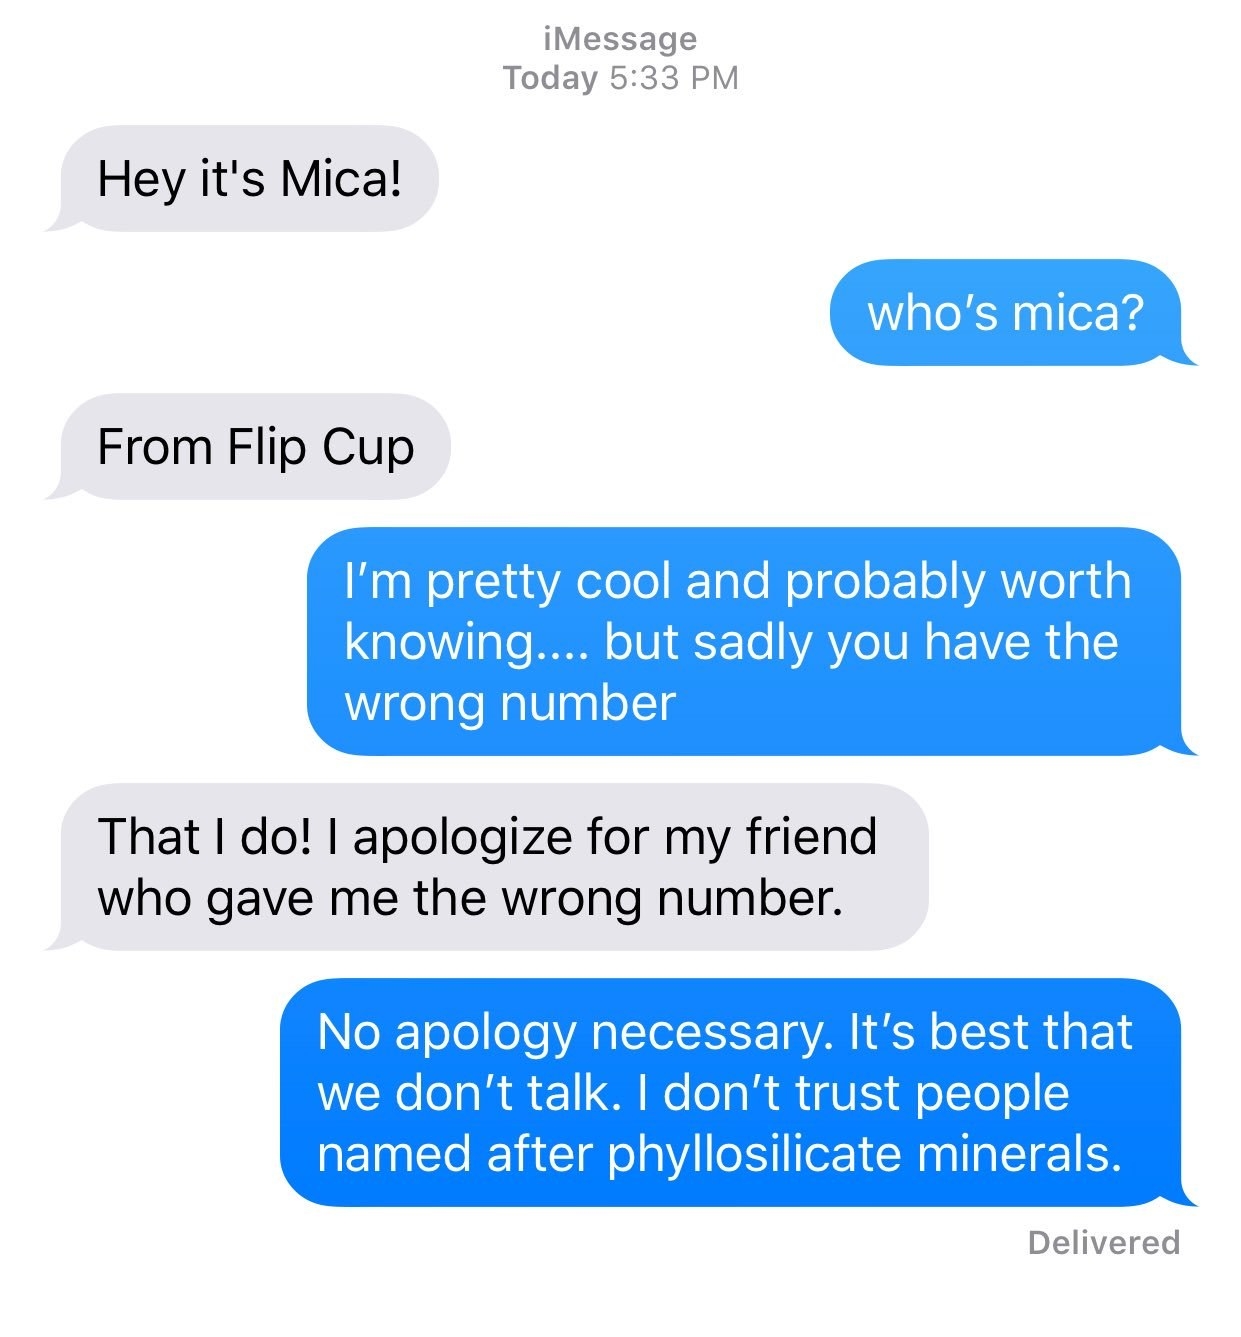 Text from &quot;Mica&quot; ends up being the wrong number, and after Mica apologizes, person says &quot;No apology necessary; it&#x27;s best that we don&#x27;t talk because I don&#x27;t trust people named after phyllosilicate minerals&quot;